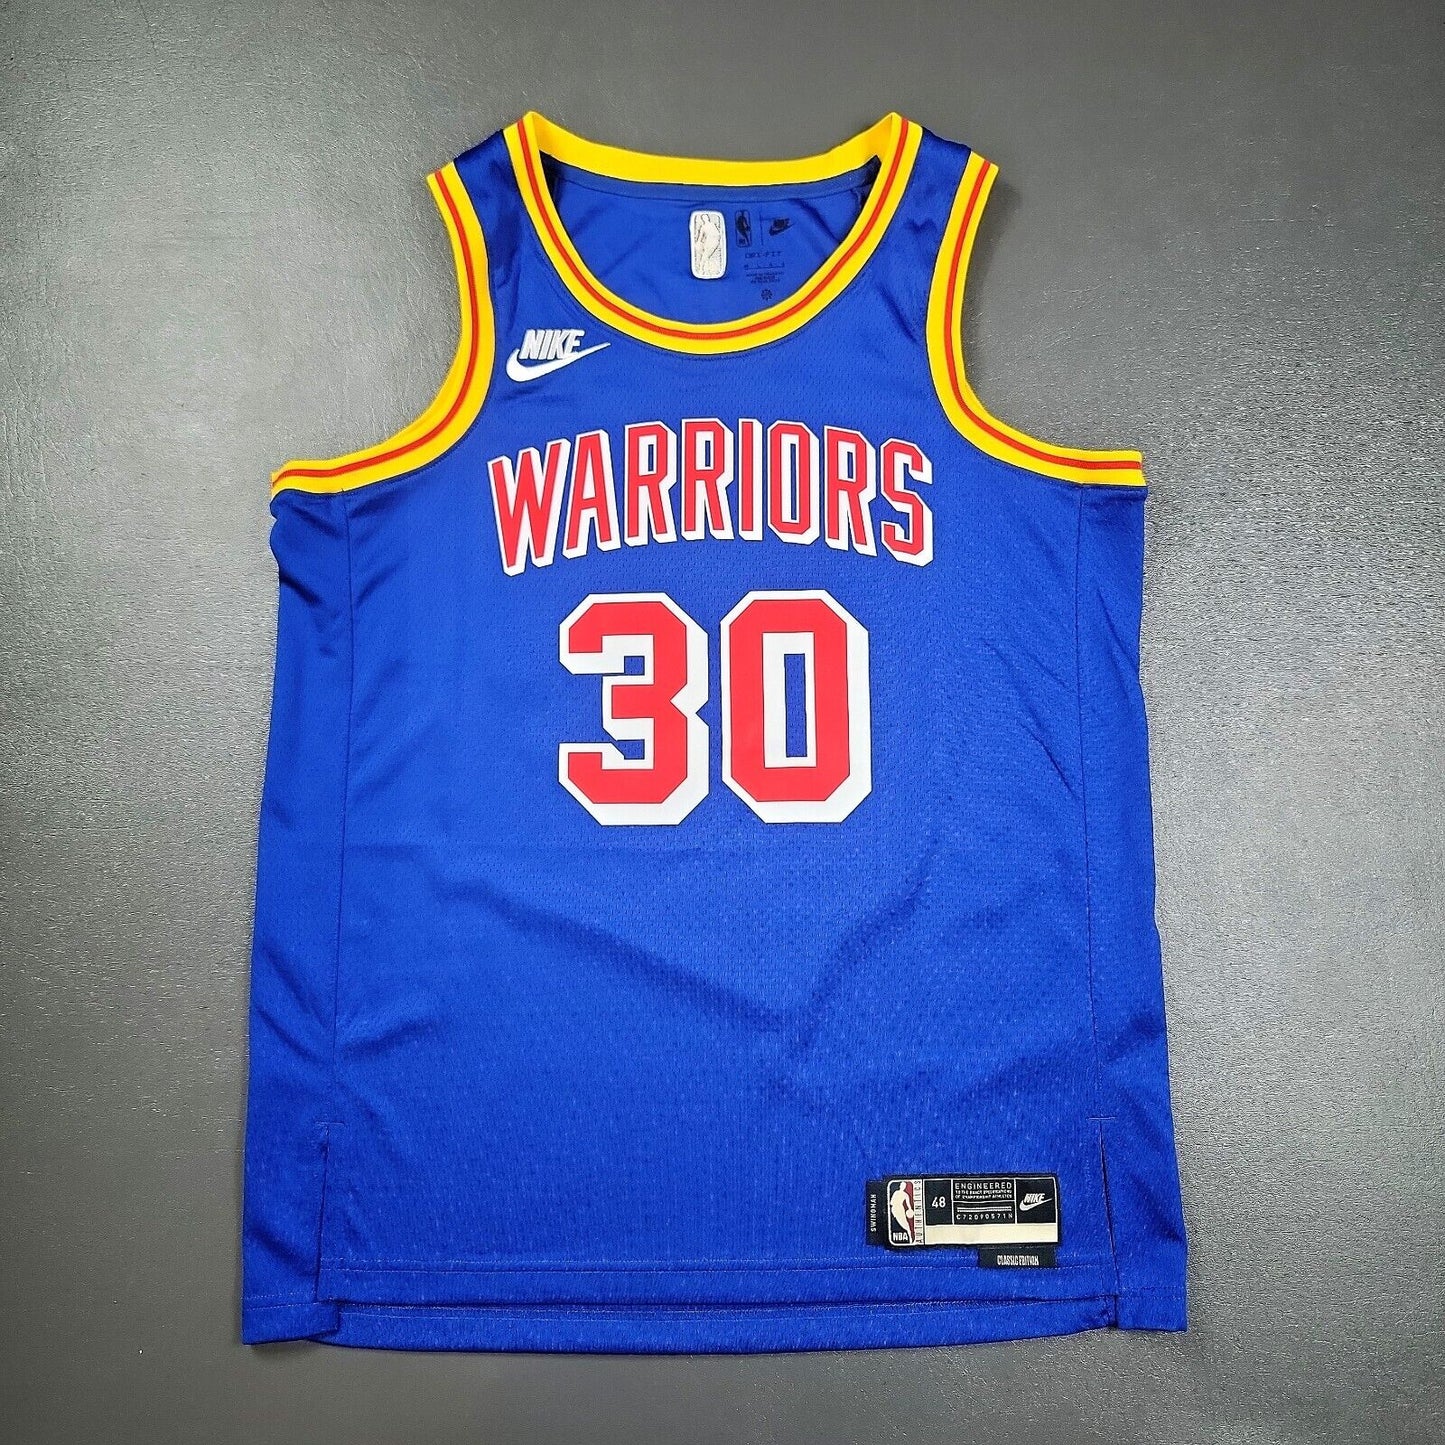 100% Authentic Stephen Curry Warriors Classic Swingman Jersey Size 48 L Mens